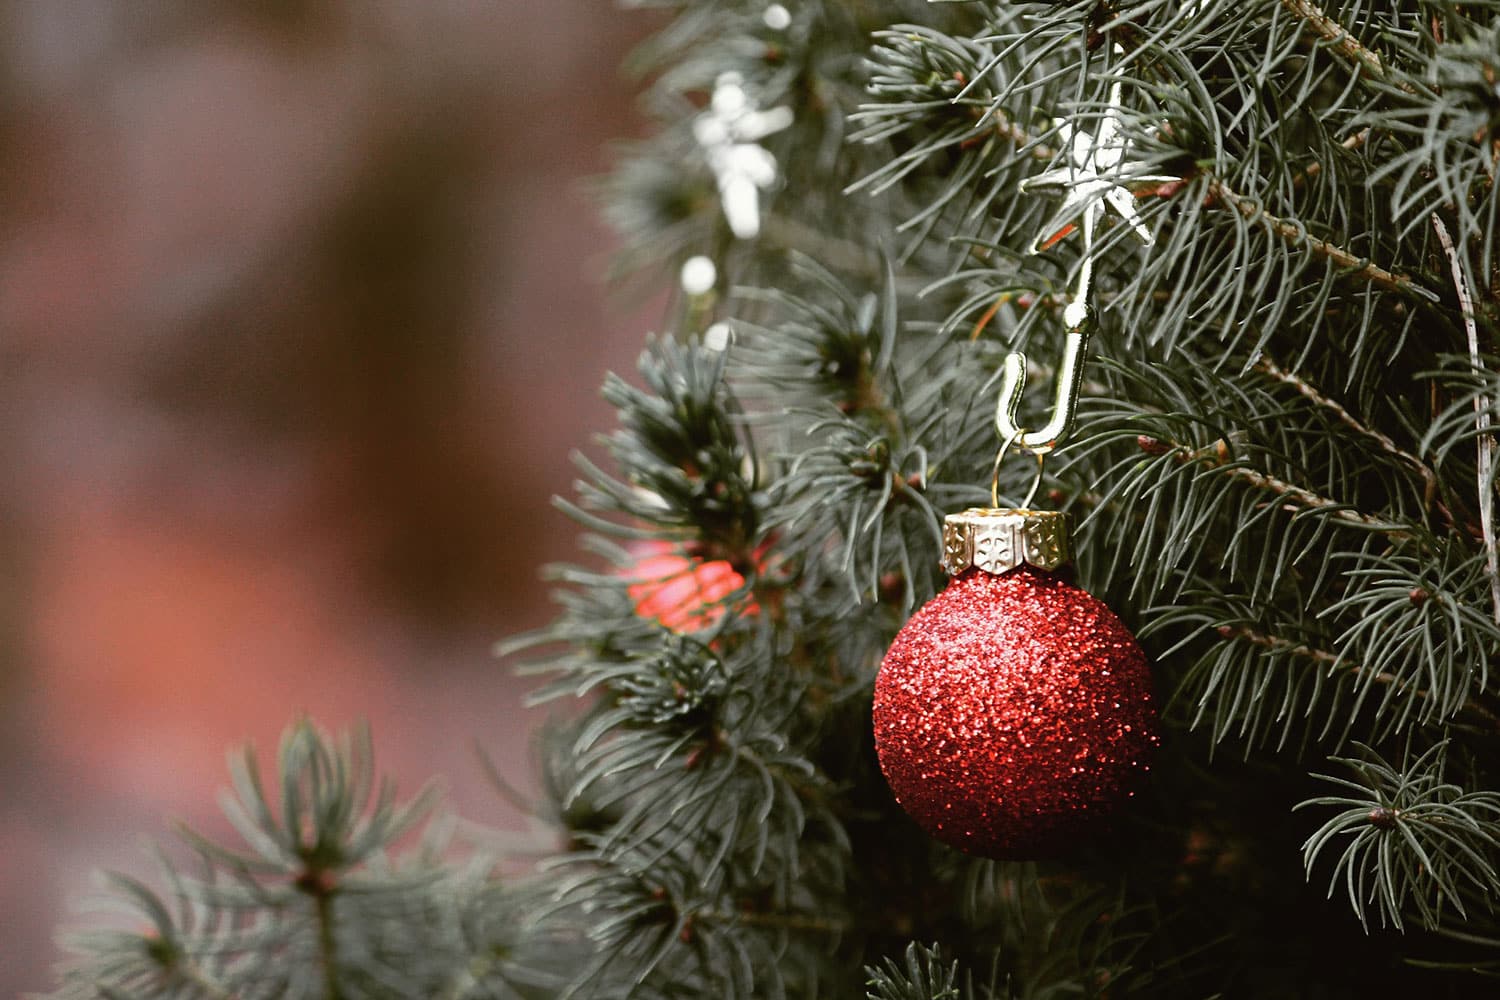 Discarded Christmas trees could be turned into renewable fuels